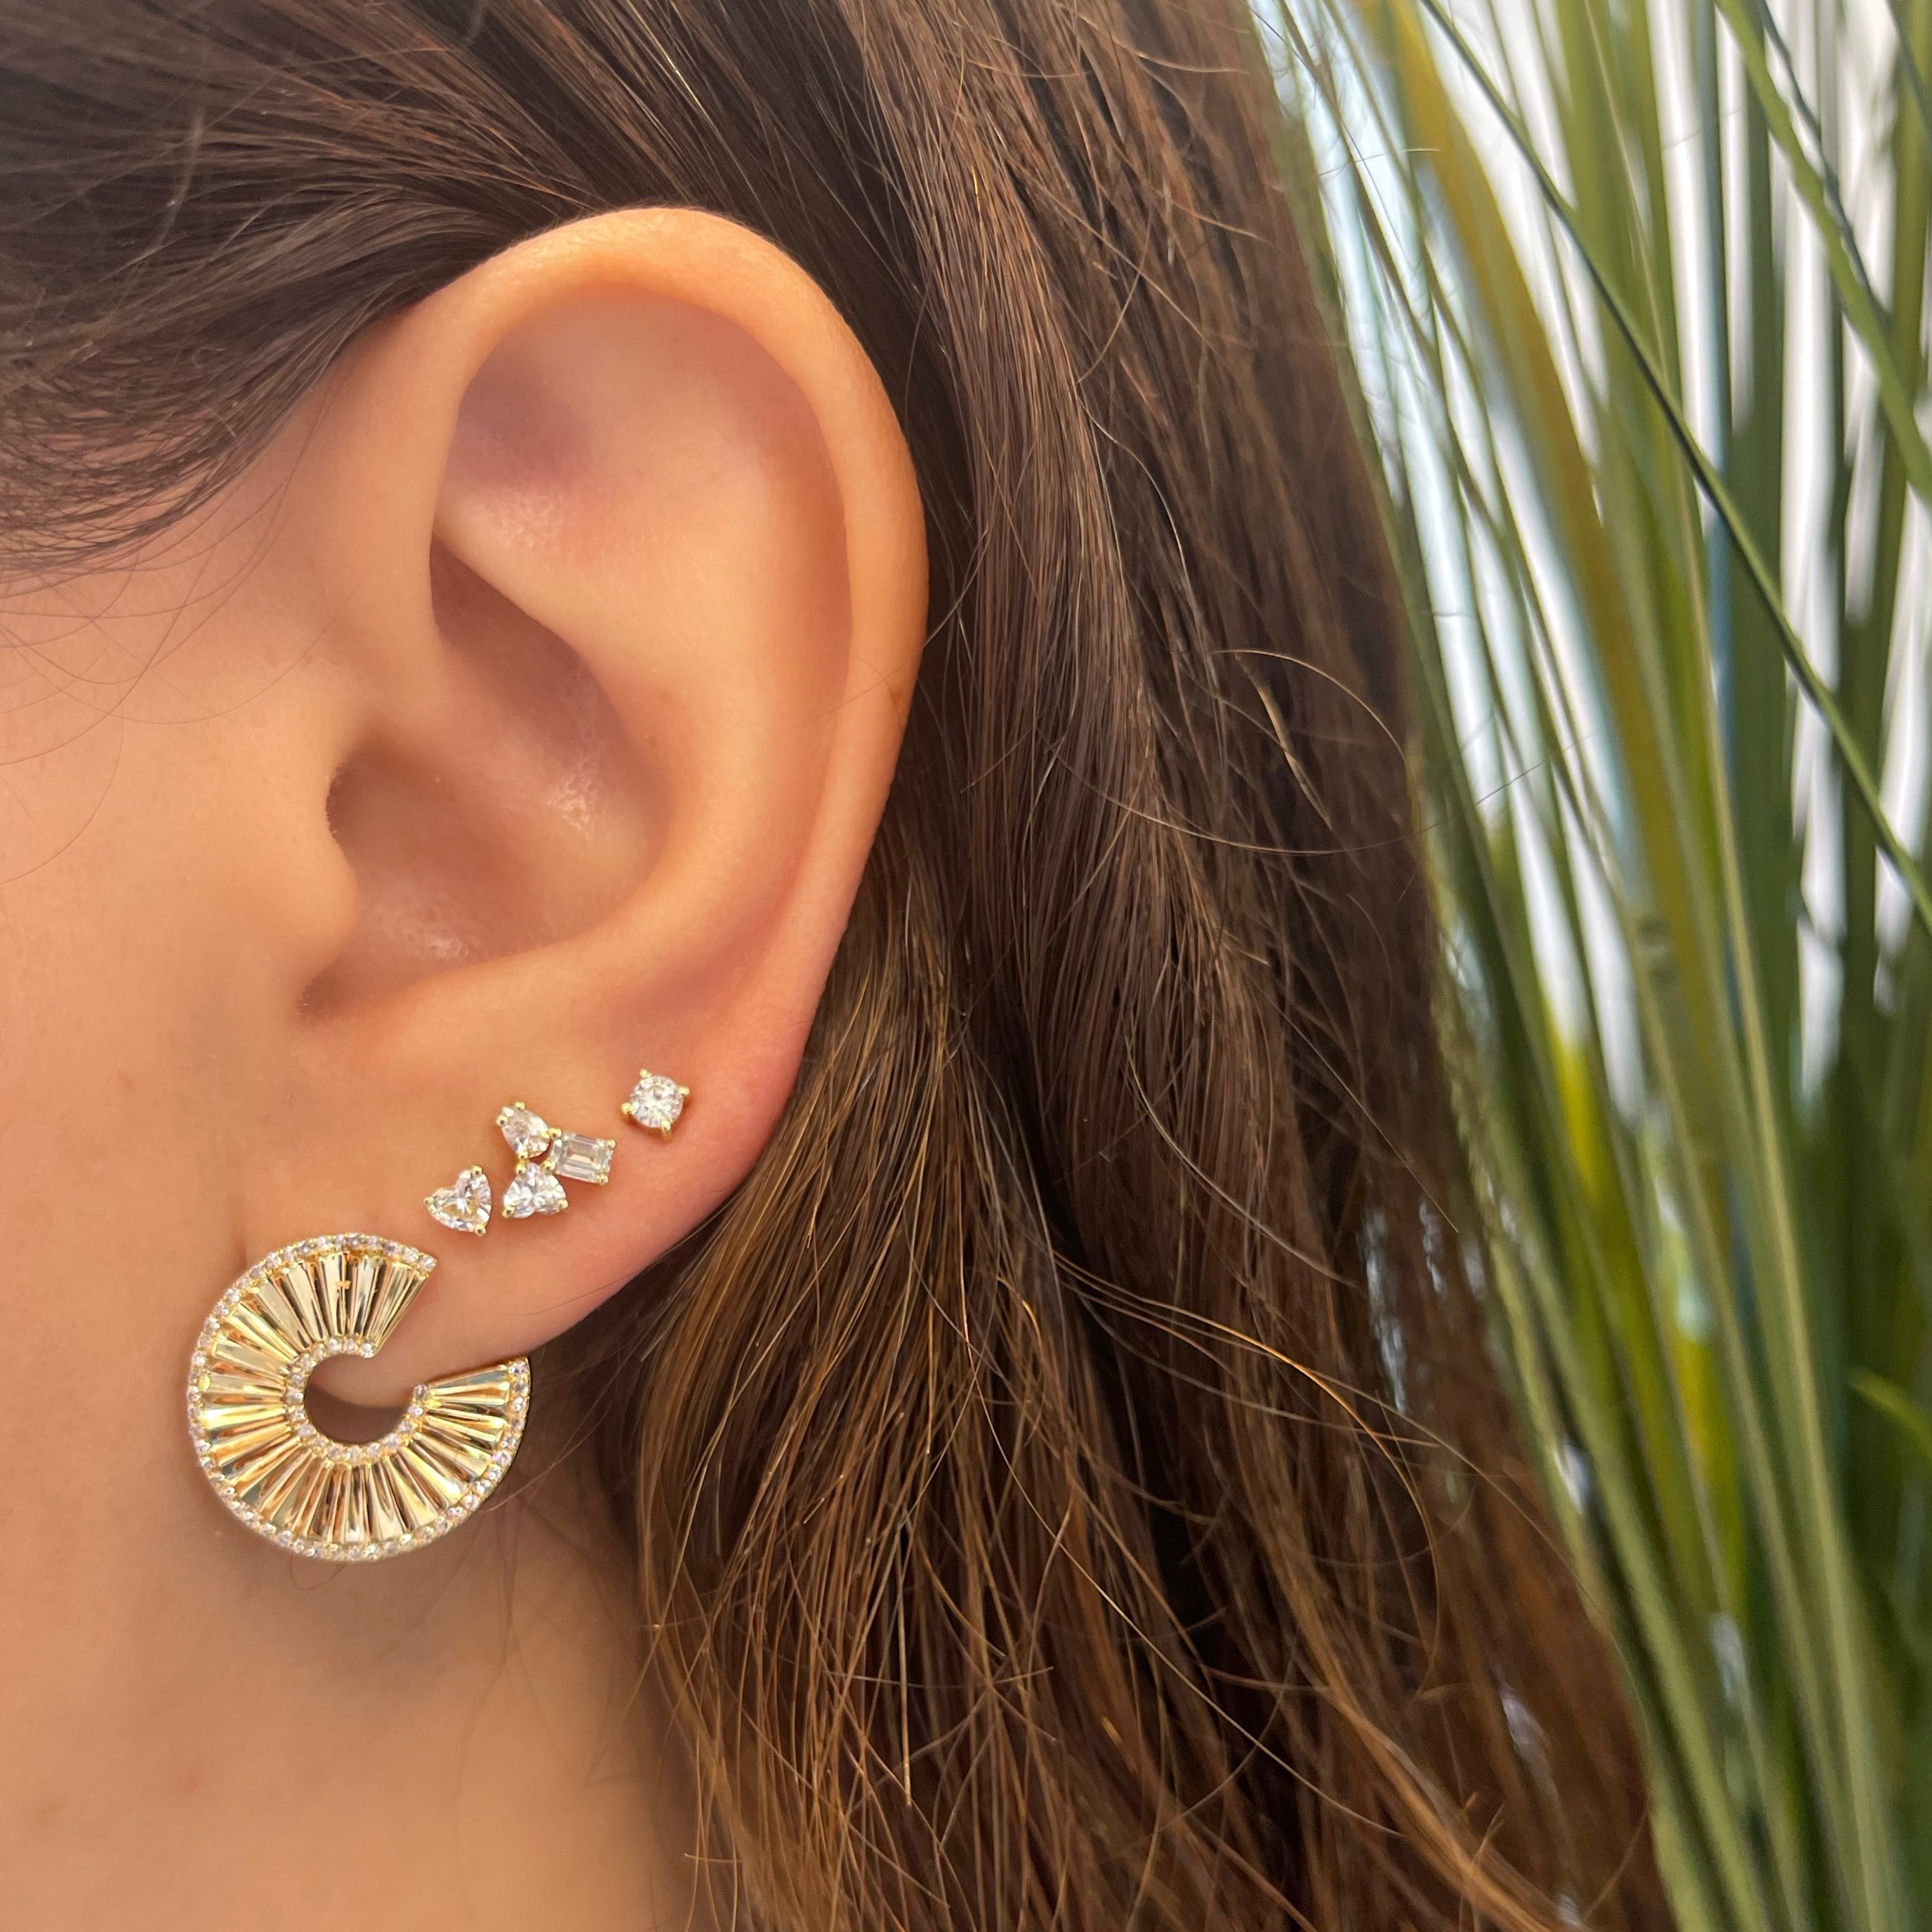 Fluted Diamond Round Statement Earrings